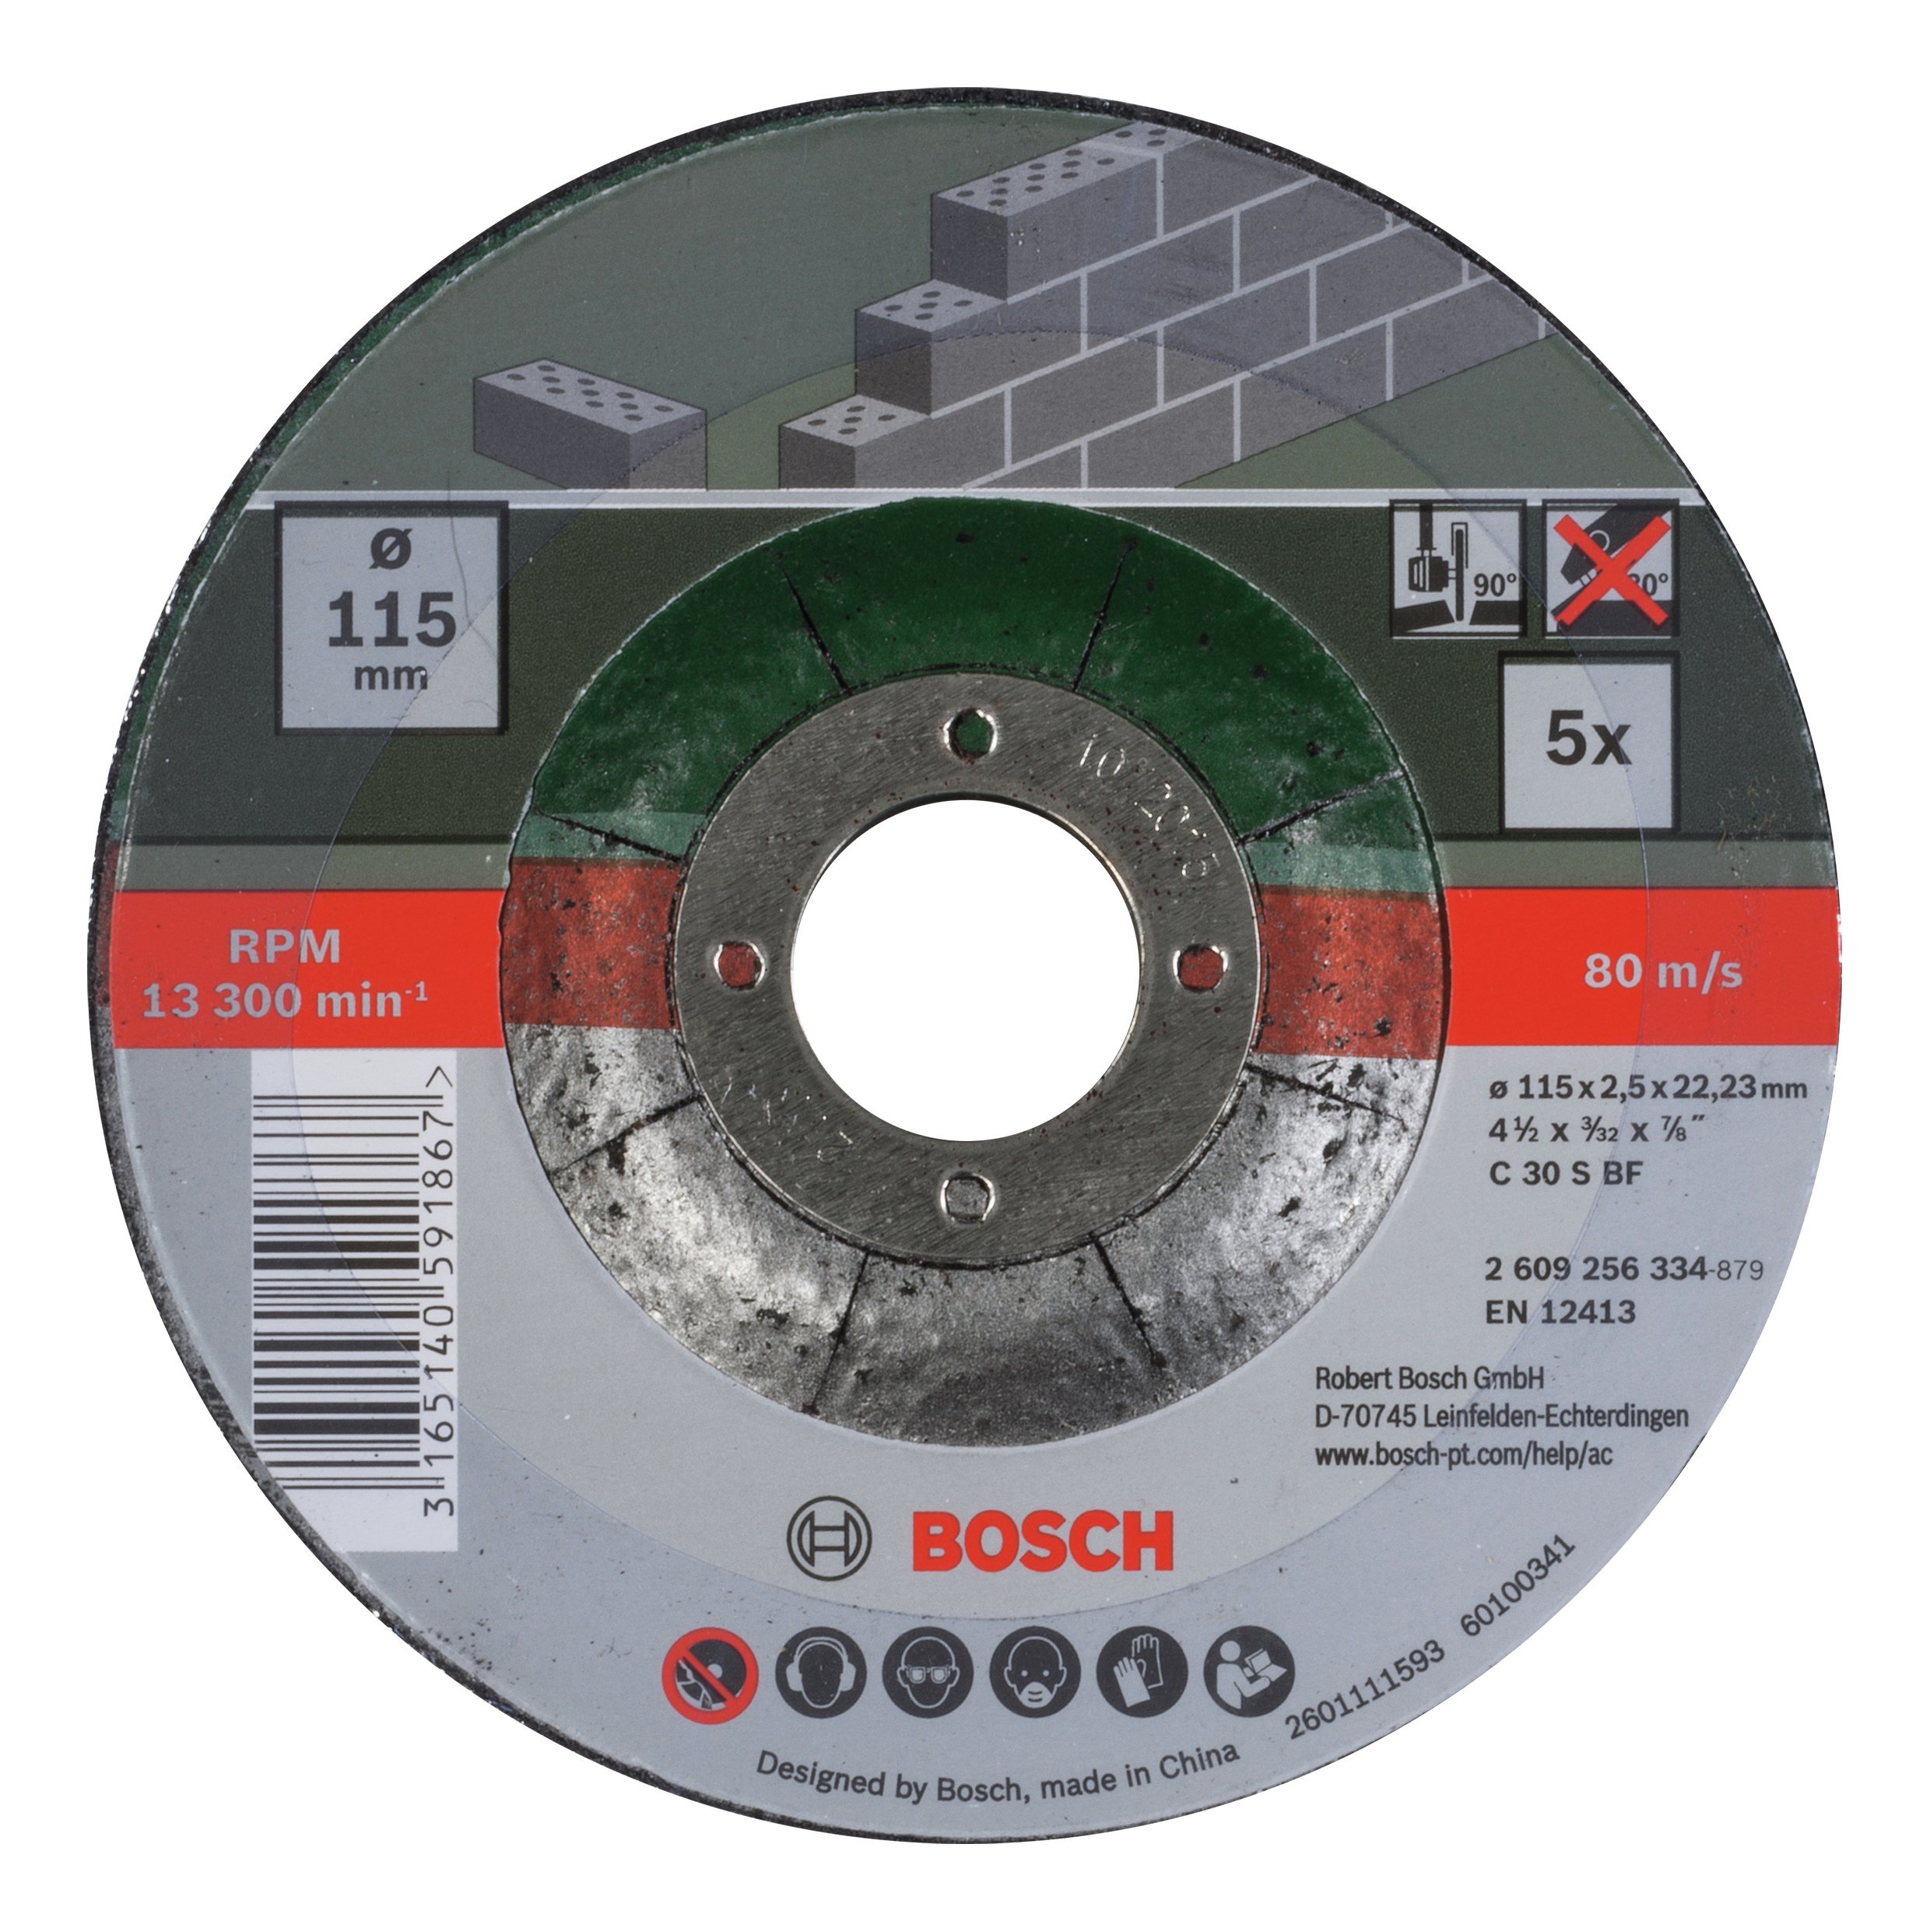 Bosch 5 Piece 115mm Stone Cutting Discs Review